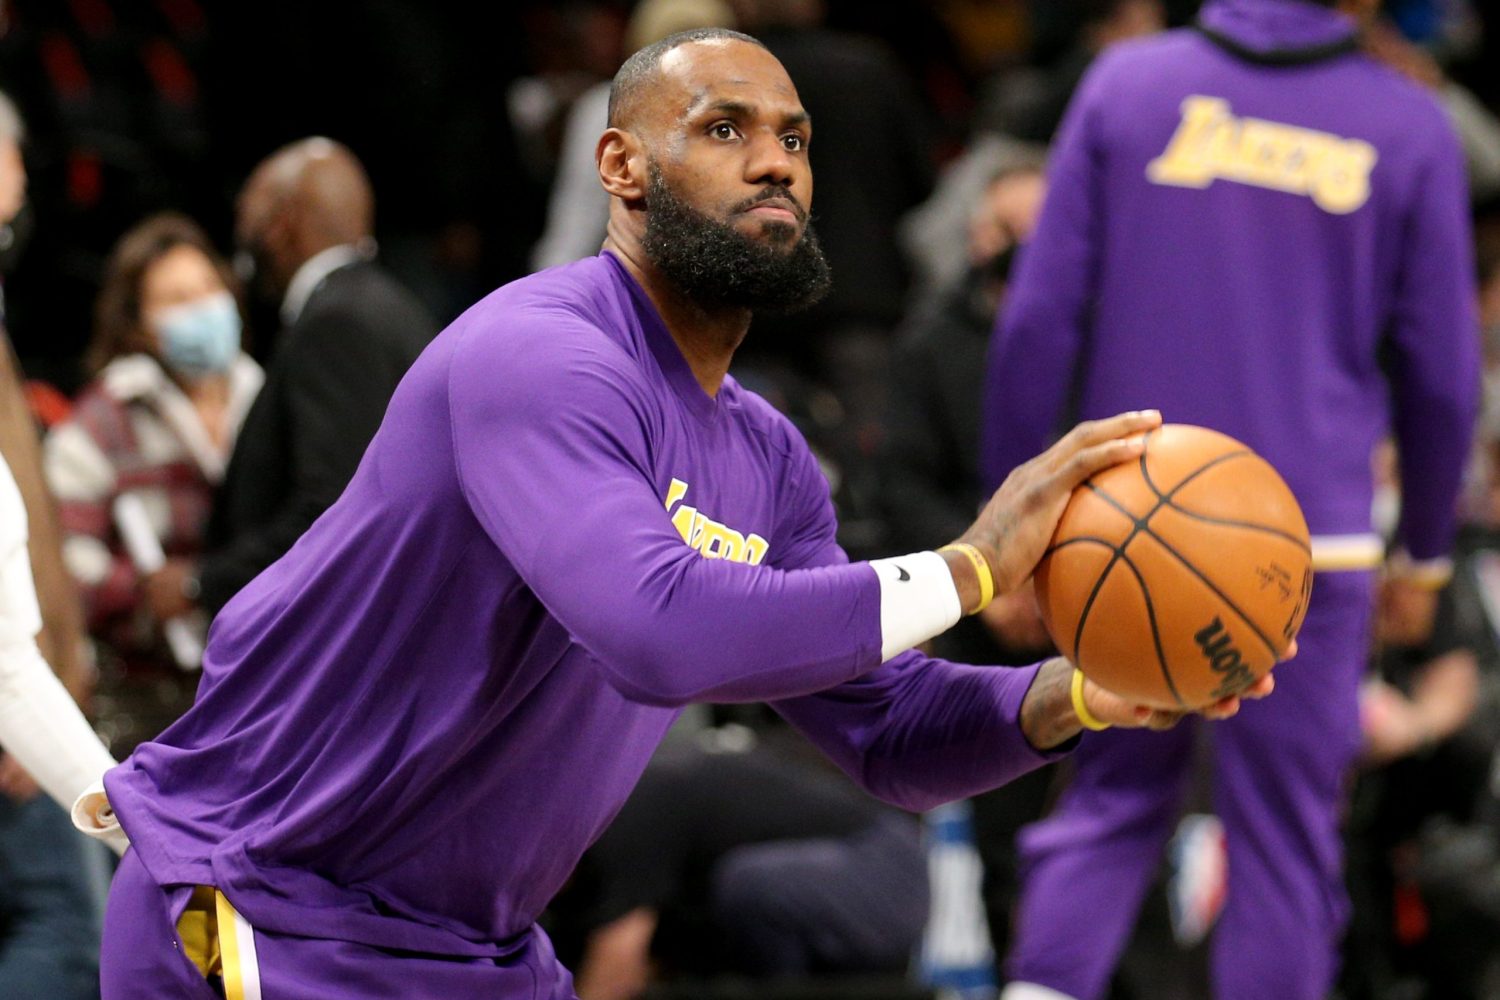 LeBron James discusses importance of living ‘healthy lifestyle’ due to being Black and having certain predispositions